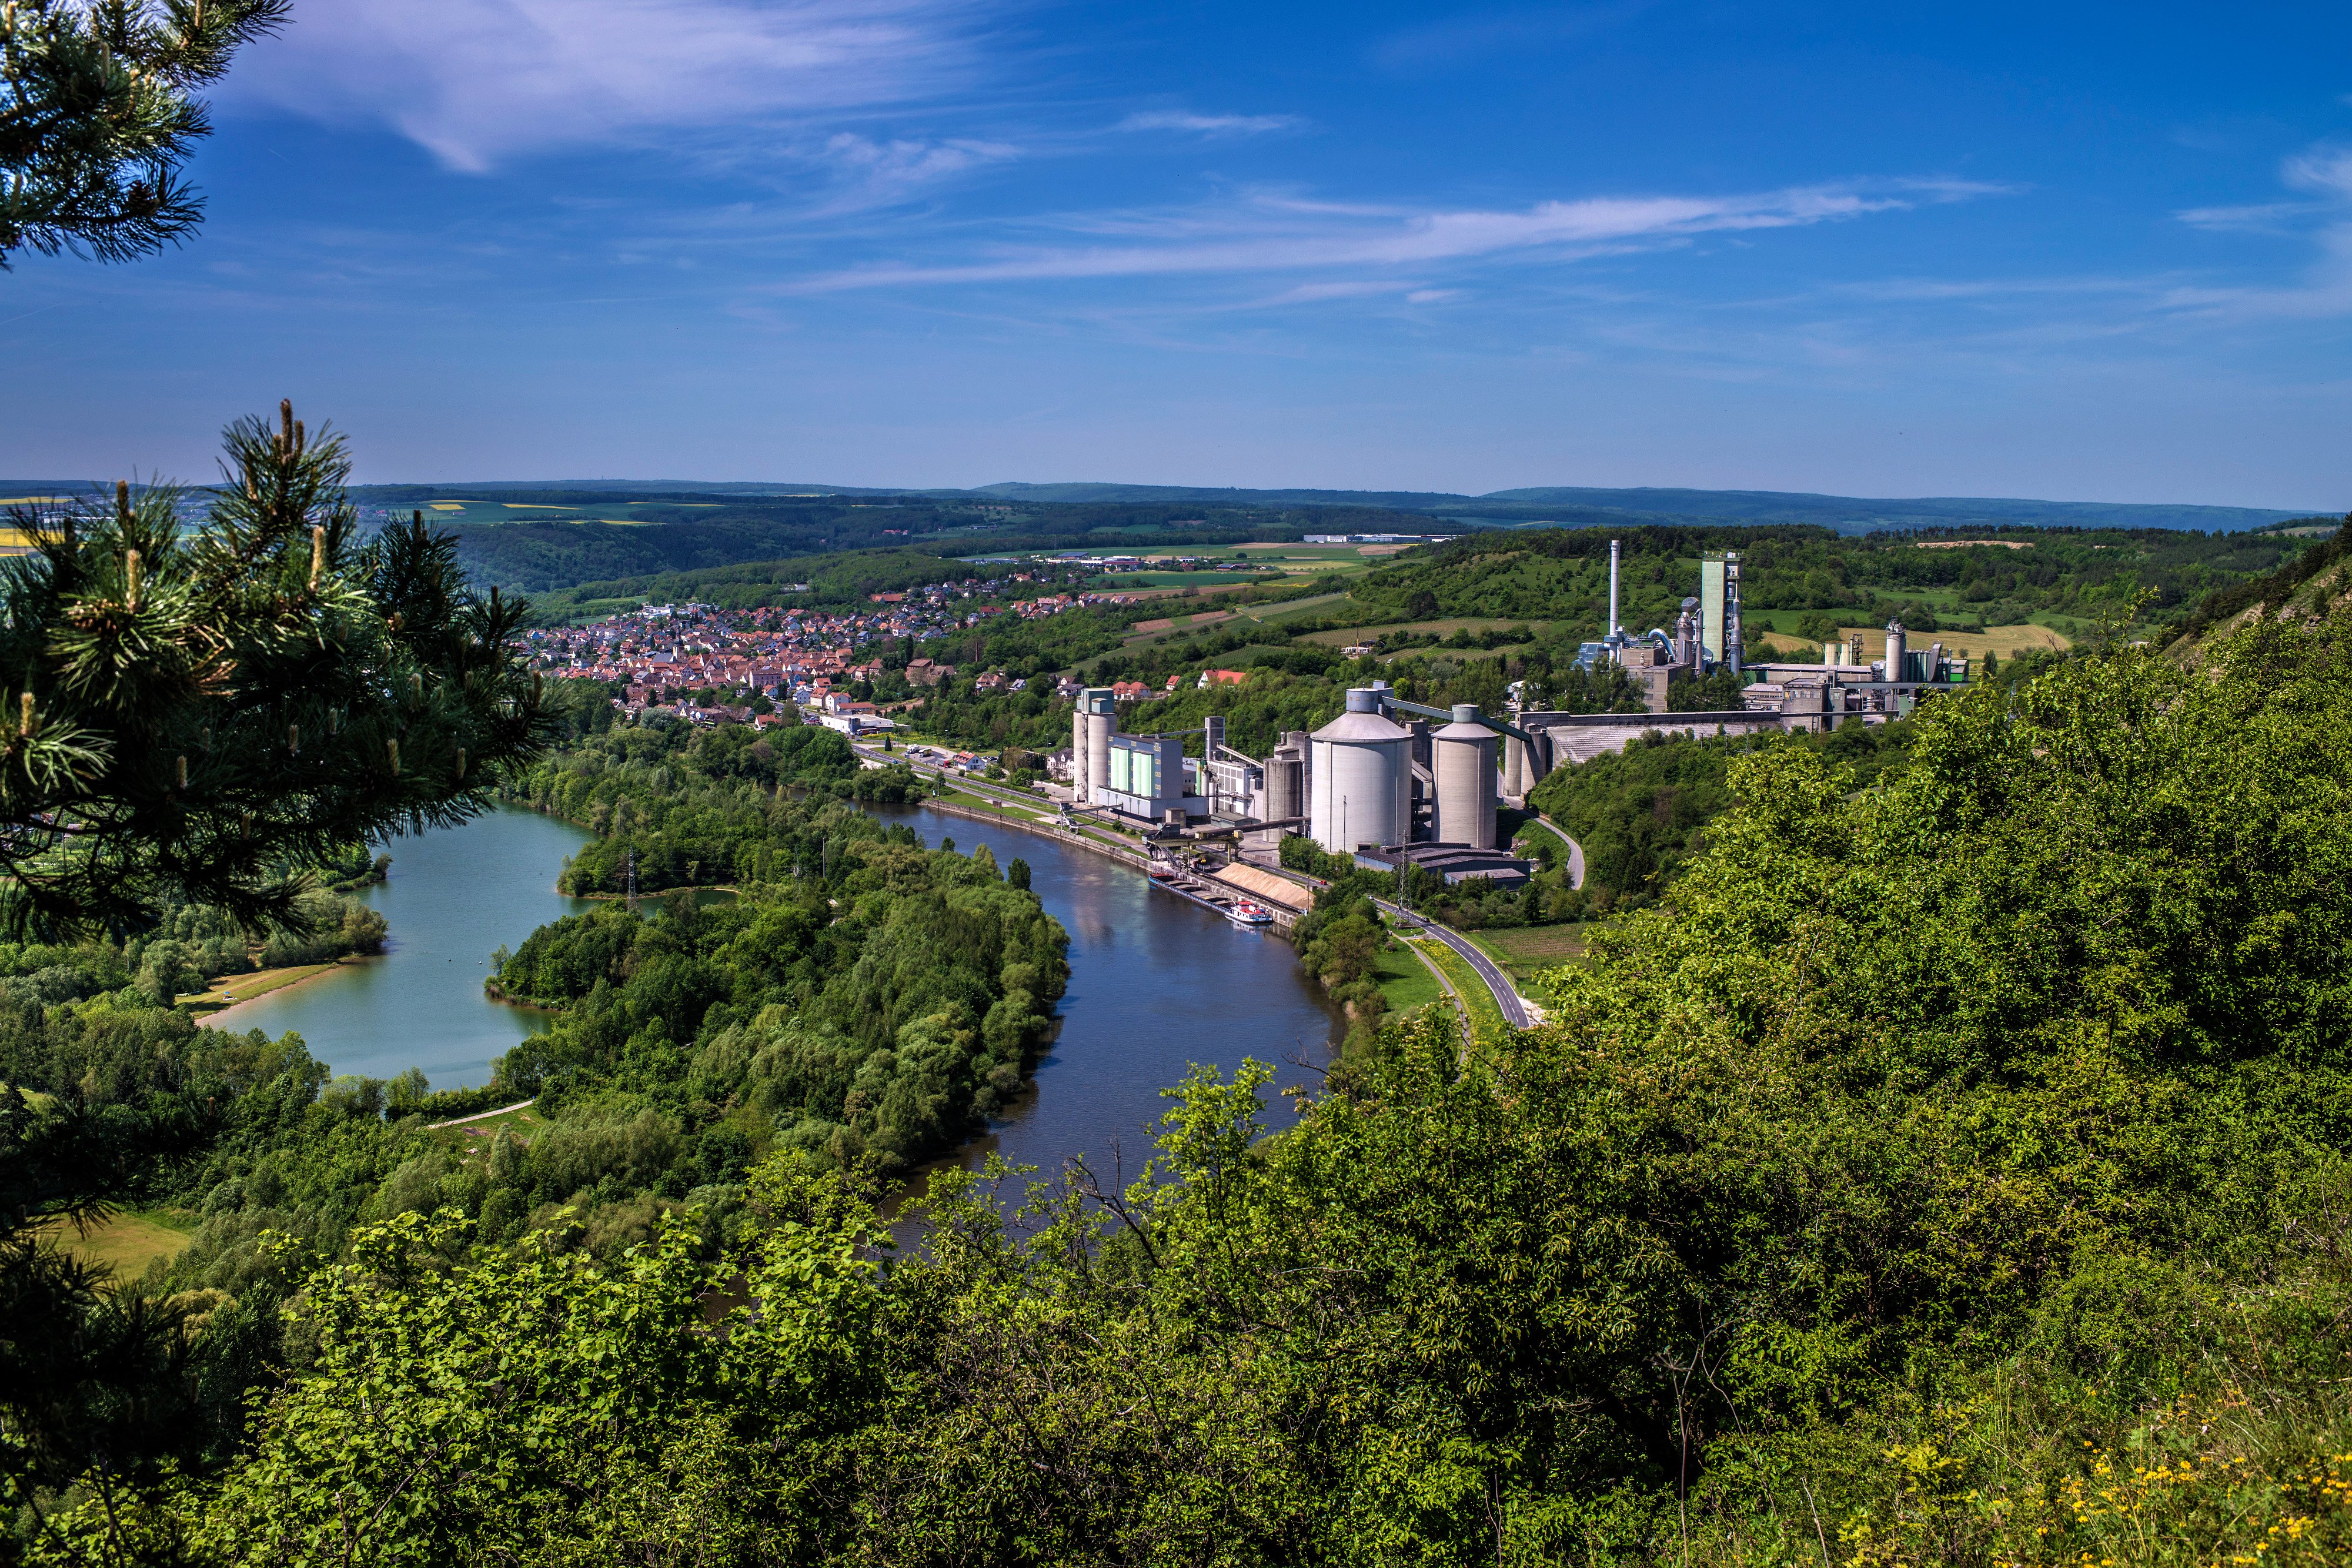 View from a hill to a cement plant in the countryside next to a body of water